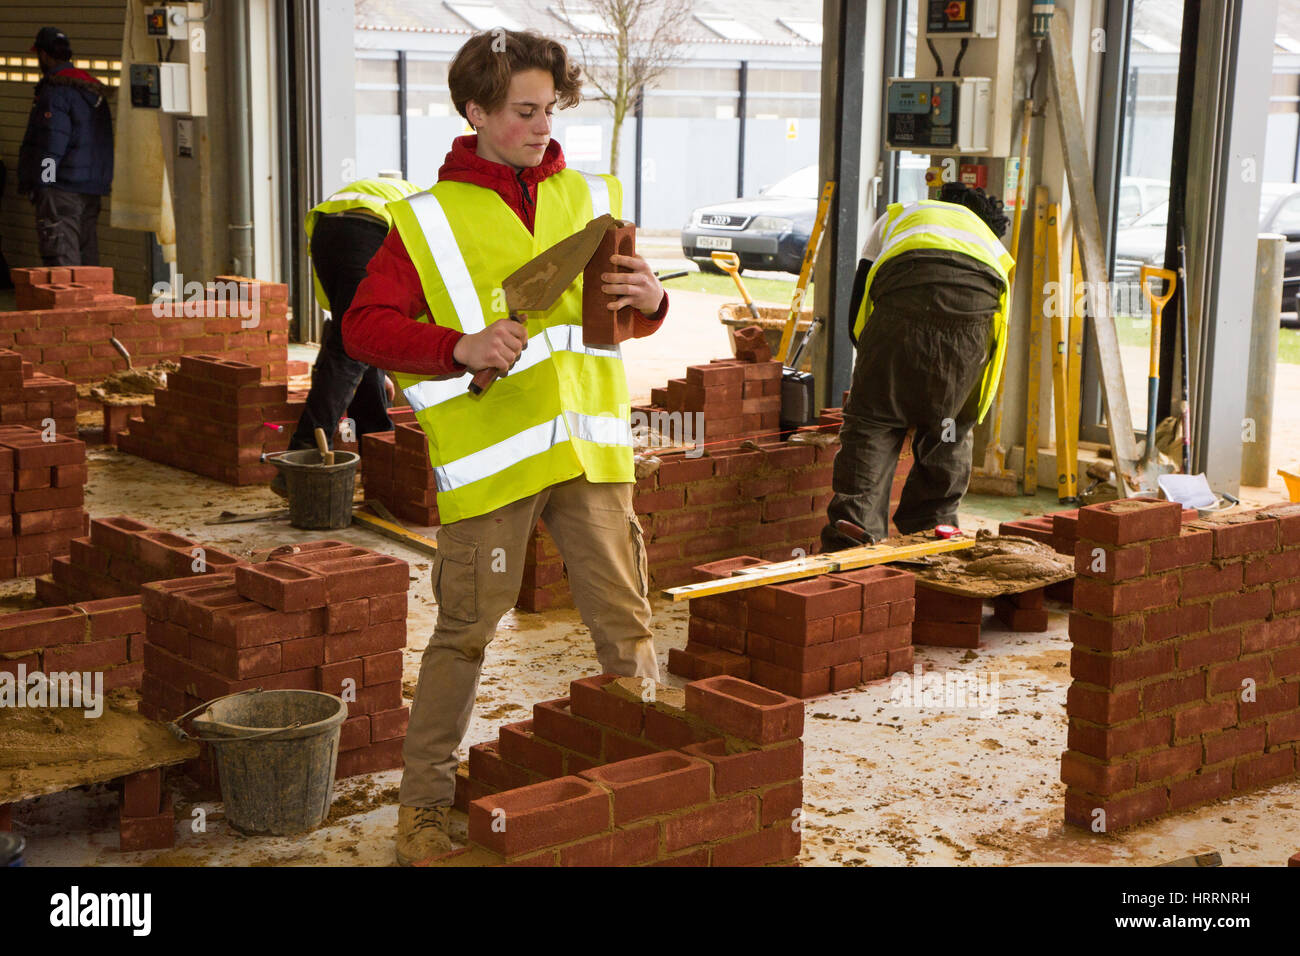 Apprentice builders learning how to construction skills Stock Photo